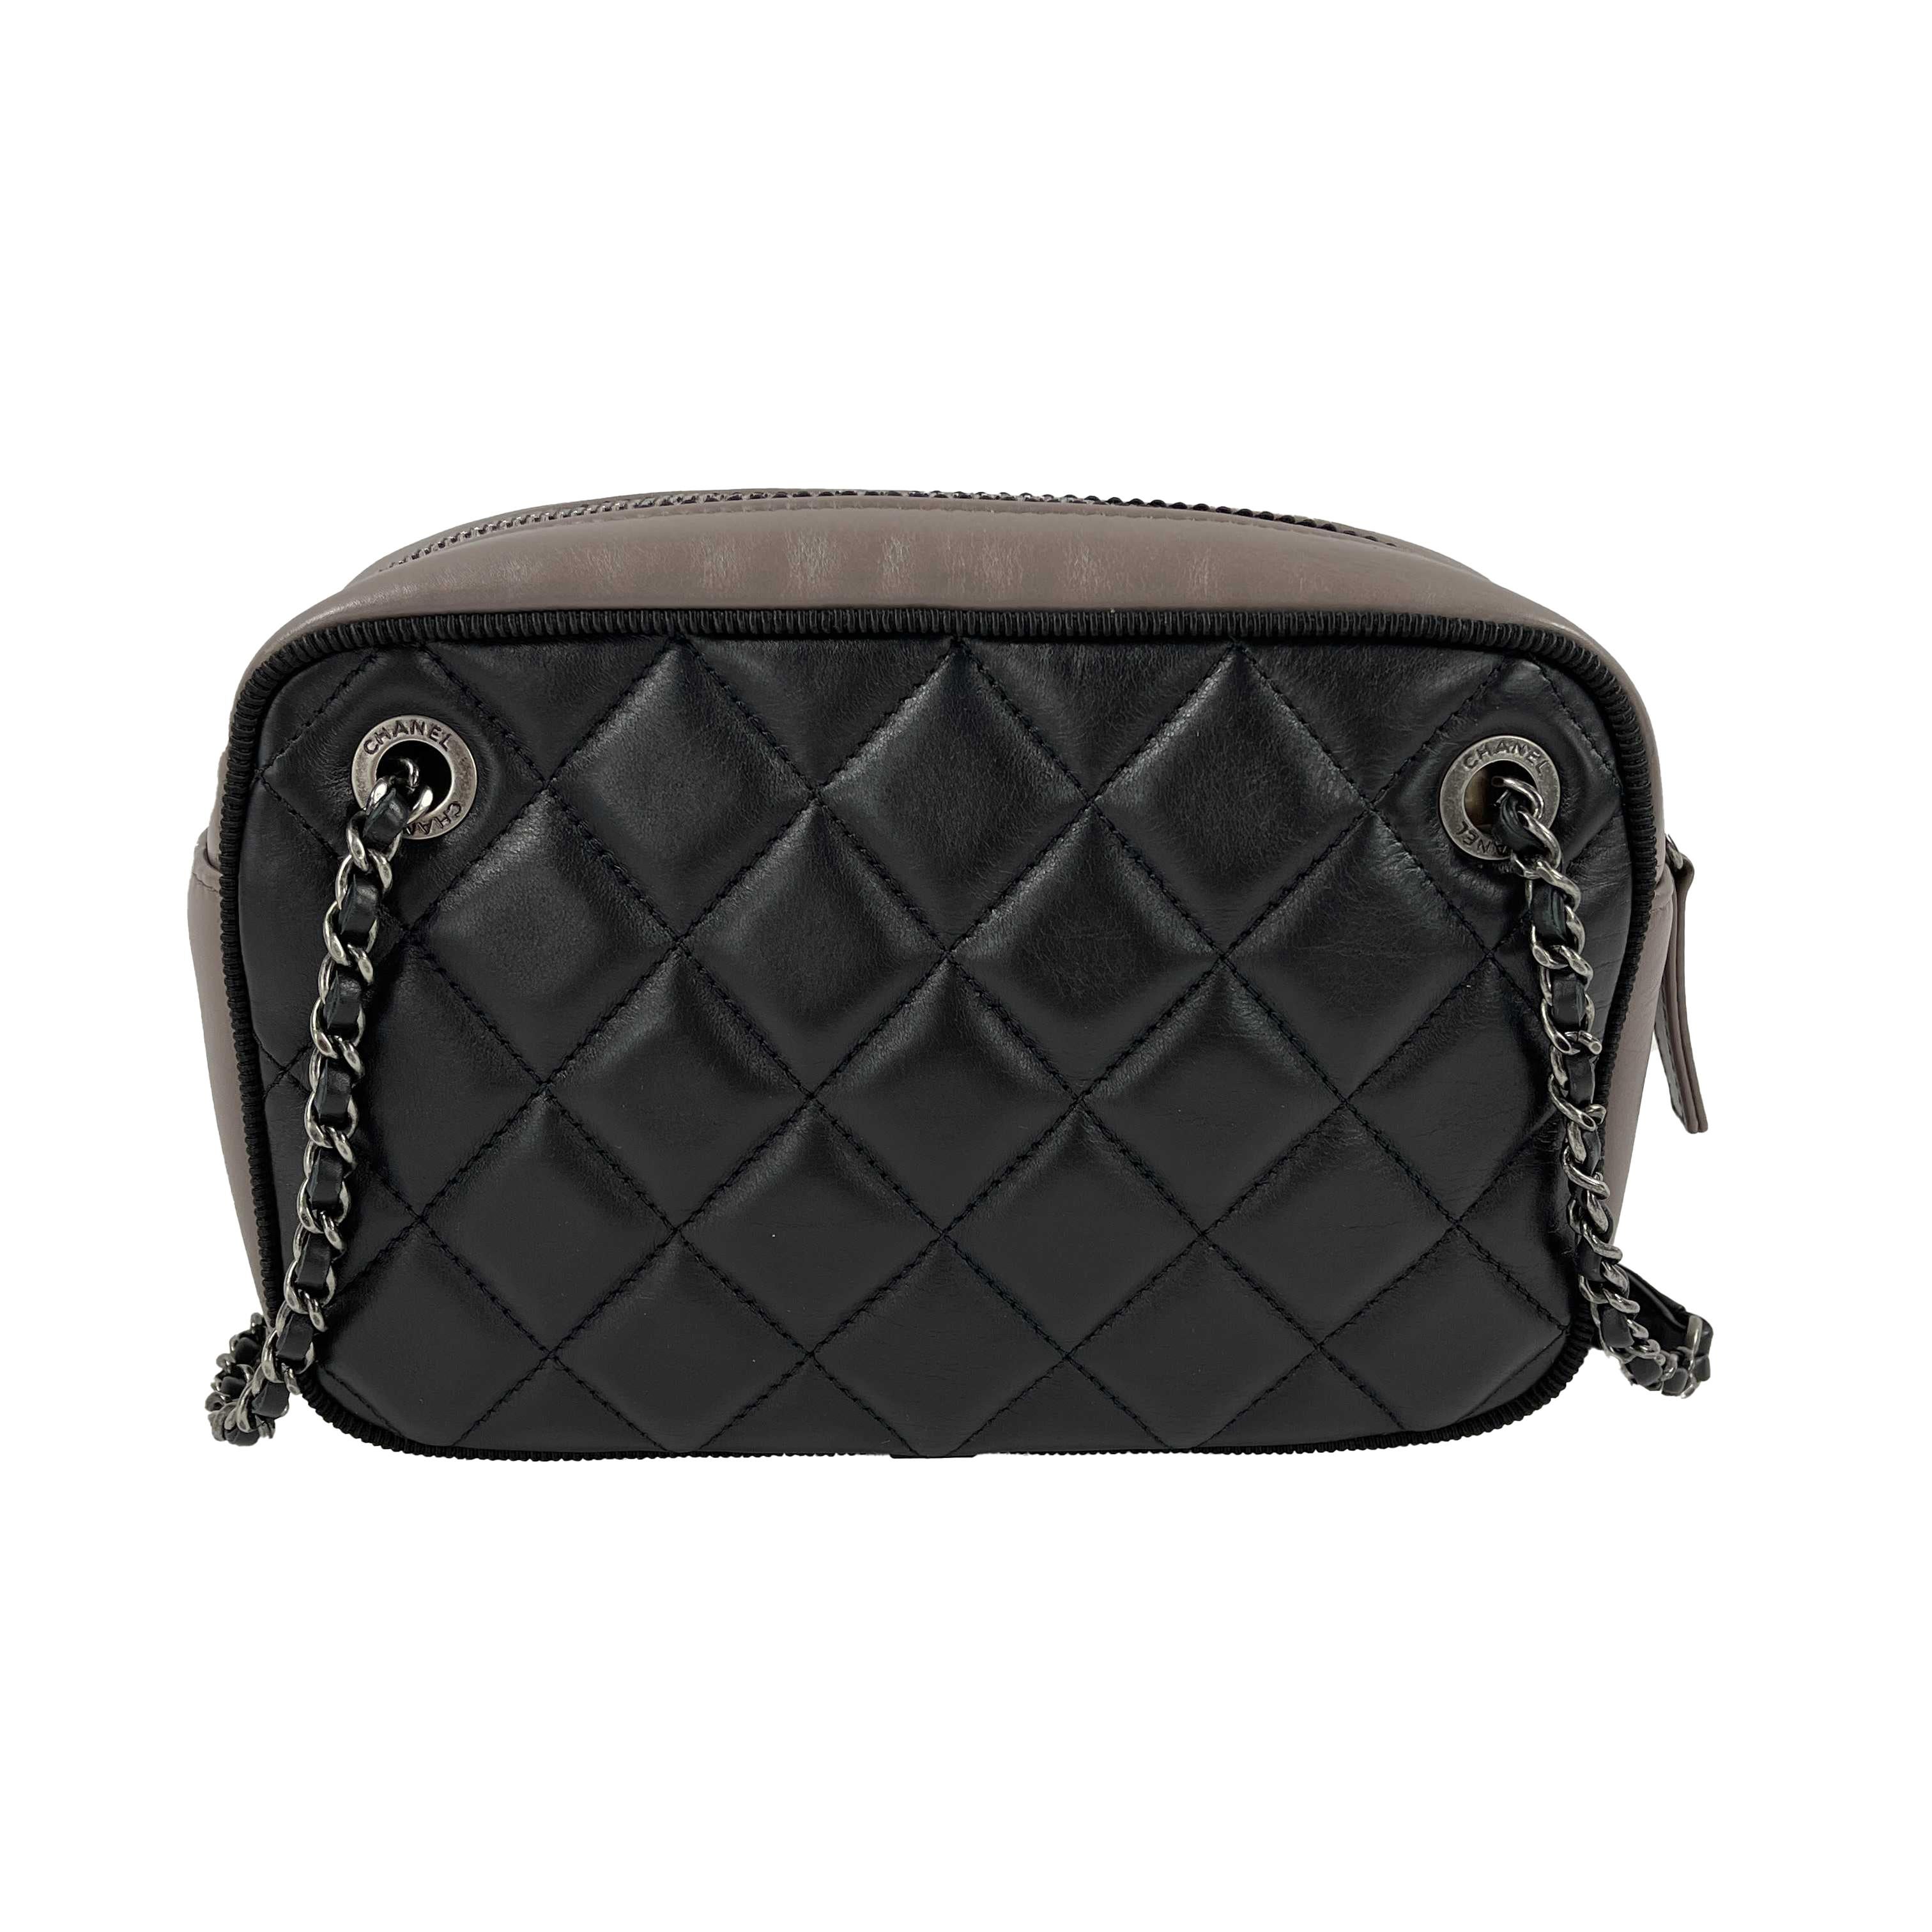 CHANEL - 2017 Bicolor Small Black / Taupe Ballerine CC Camera Case Crossbody

Description

2017 Collection.
This deep taupe and black quilted leather bag can be worn on the shoulder with double straps or crossbody.
Zip top closure.
Threaded chain